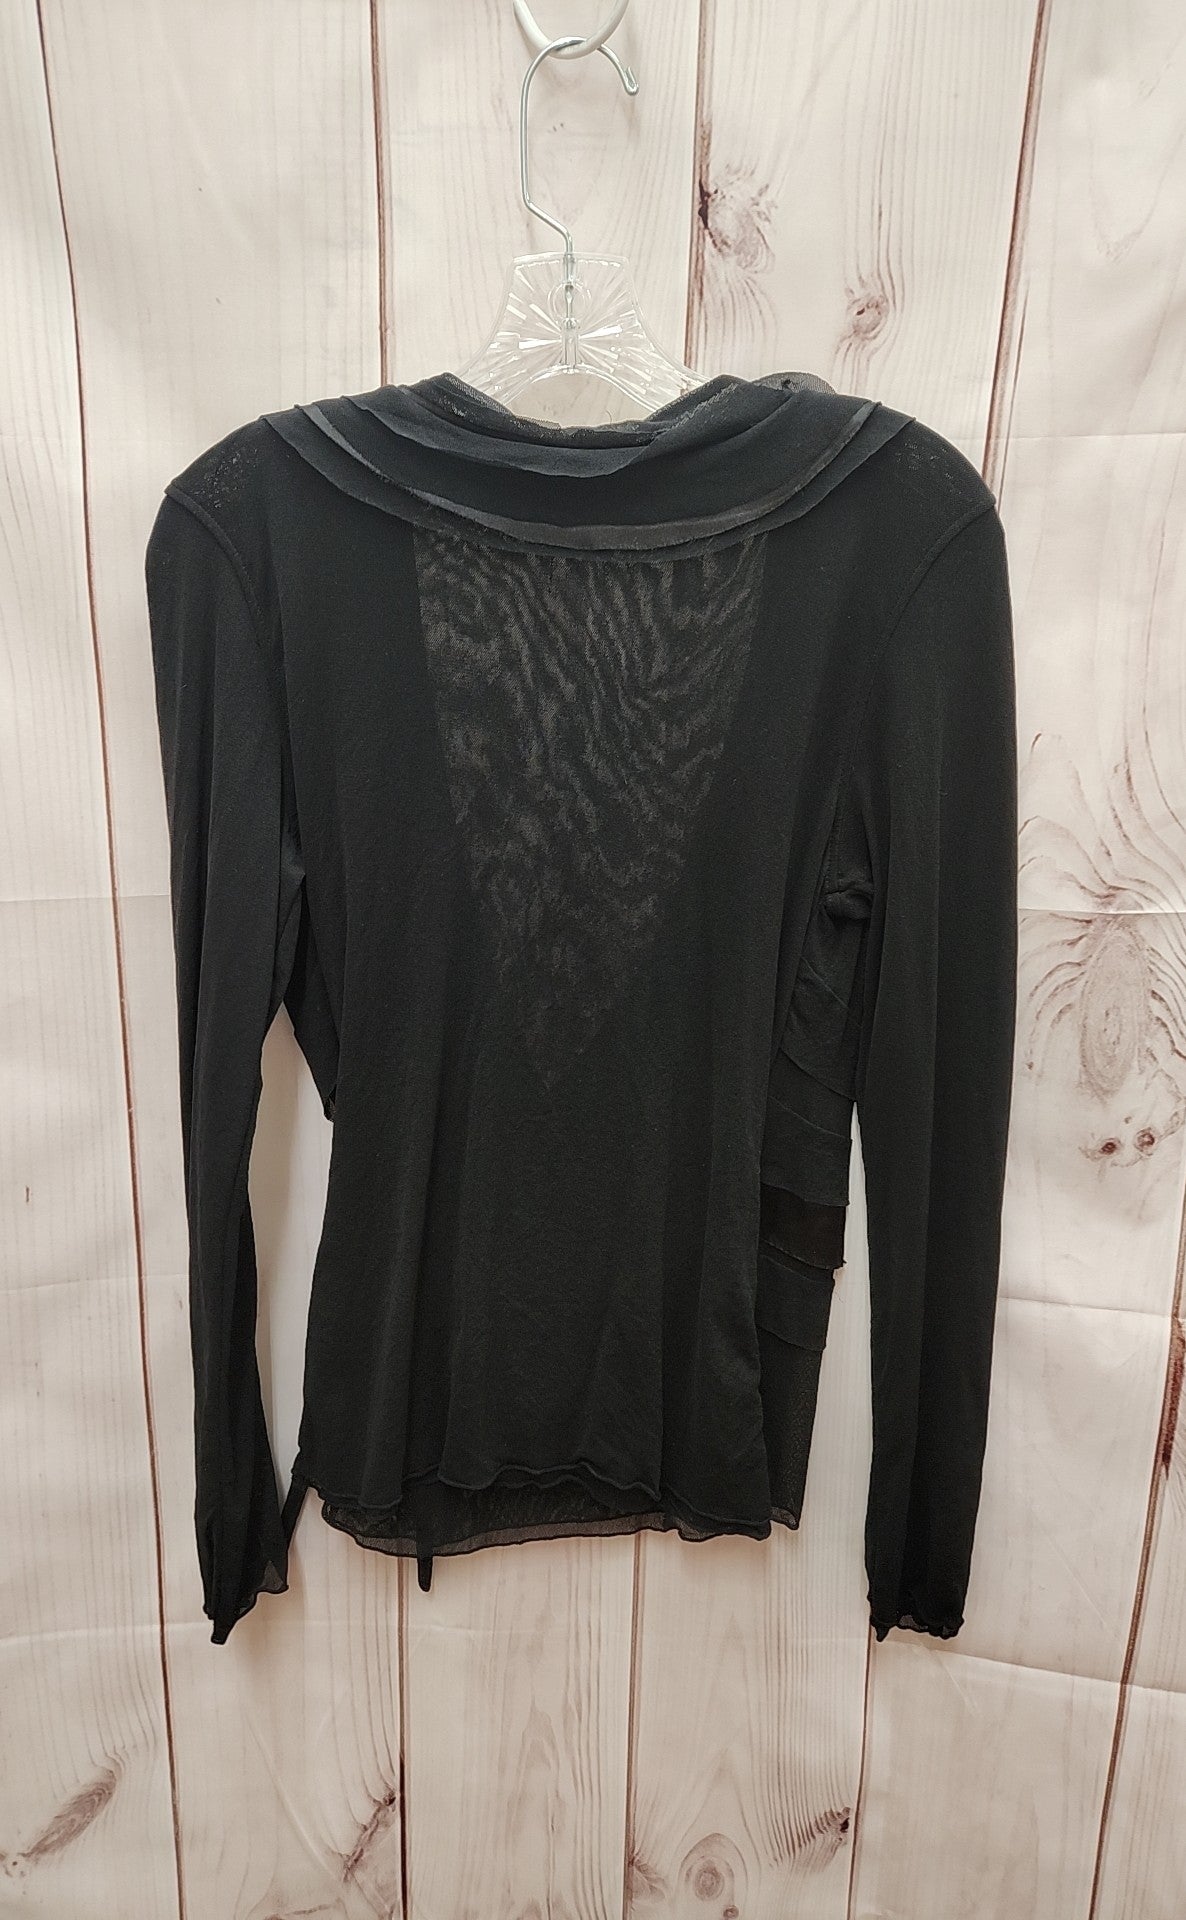 Limited Women's Size L Black Long Sleeve Top